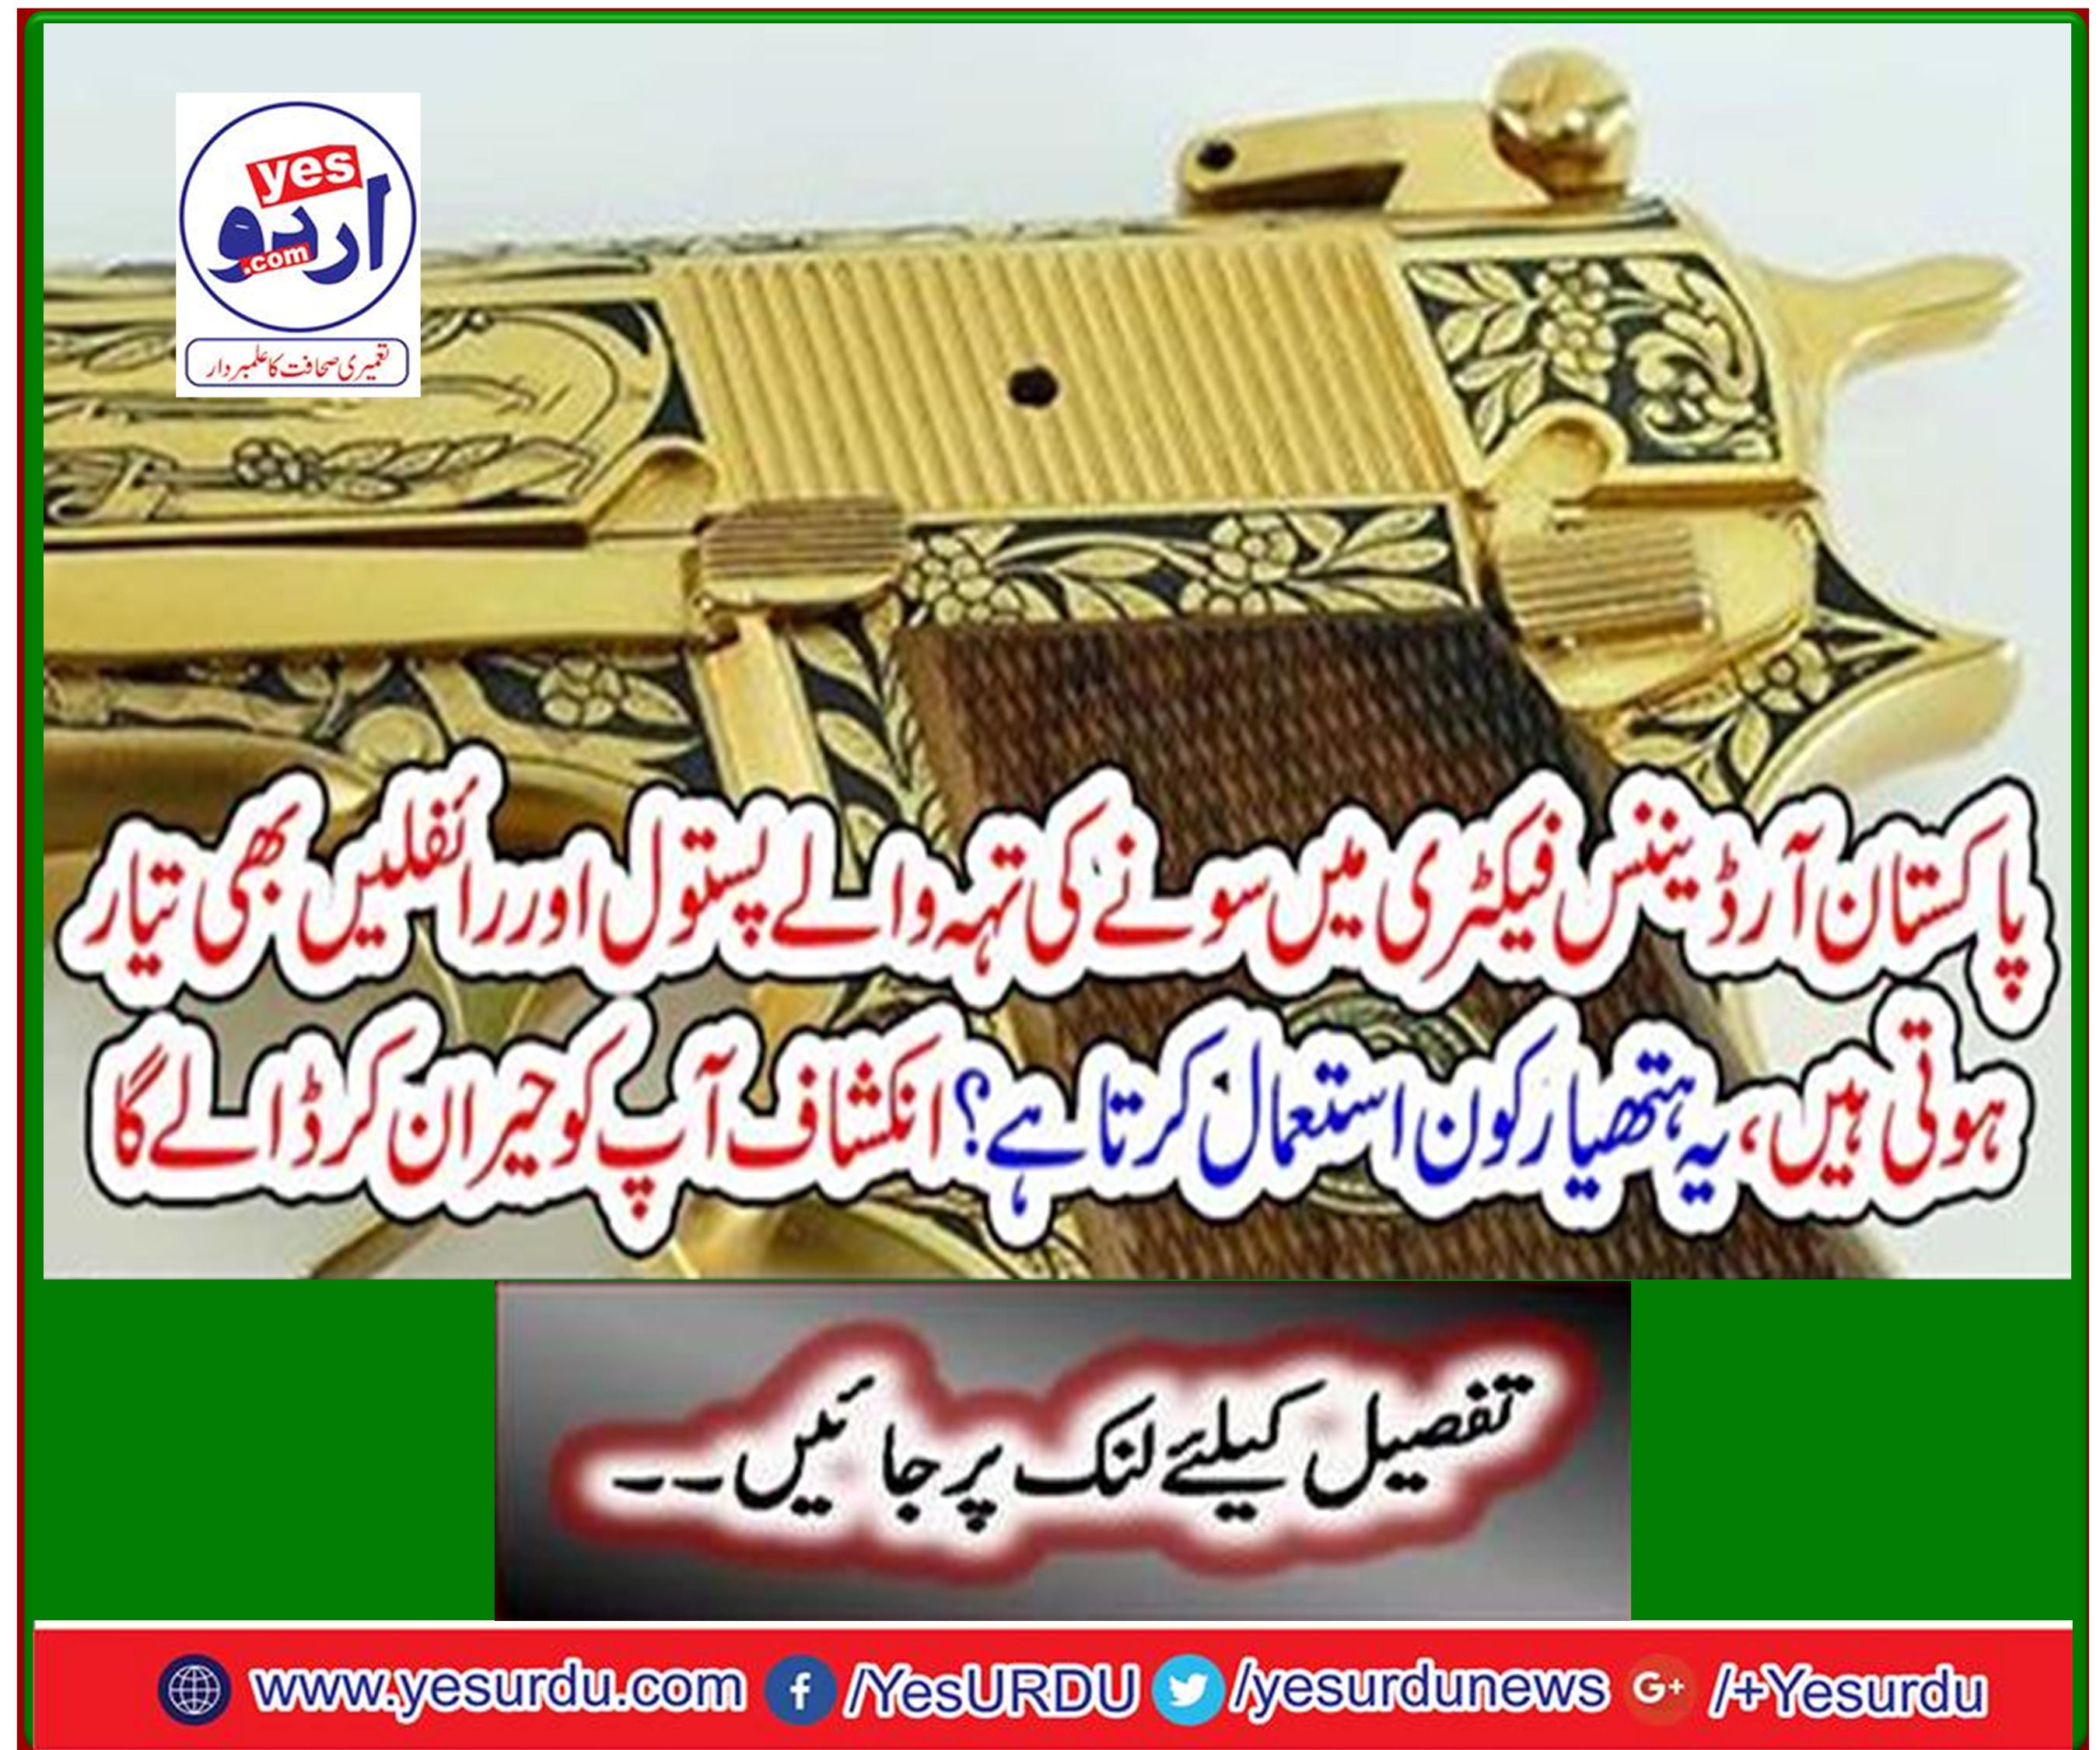 Gold ordinance pistols and rifles are also manufactured in the Pakistan Ordnance Factory. Who uses this weapon? The revelation will surprise you